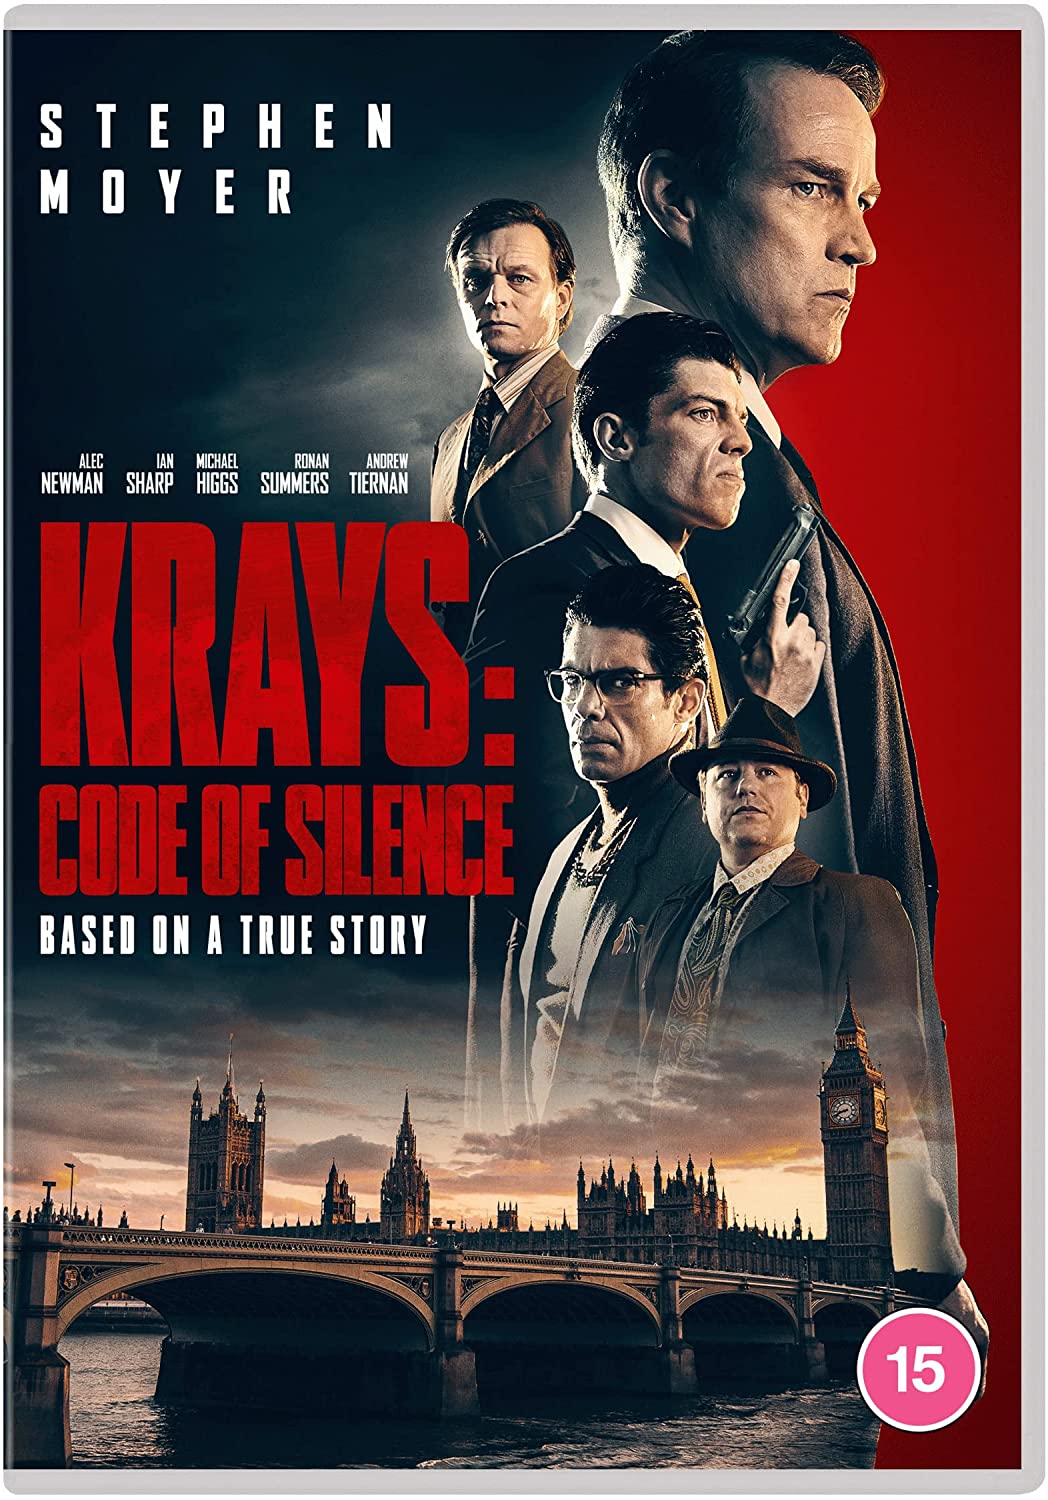 boom reviews - win krays: code of silence on DVD